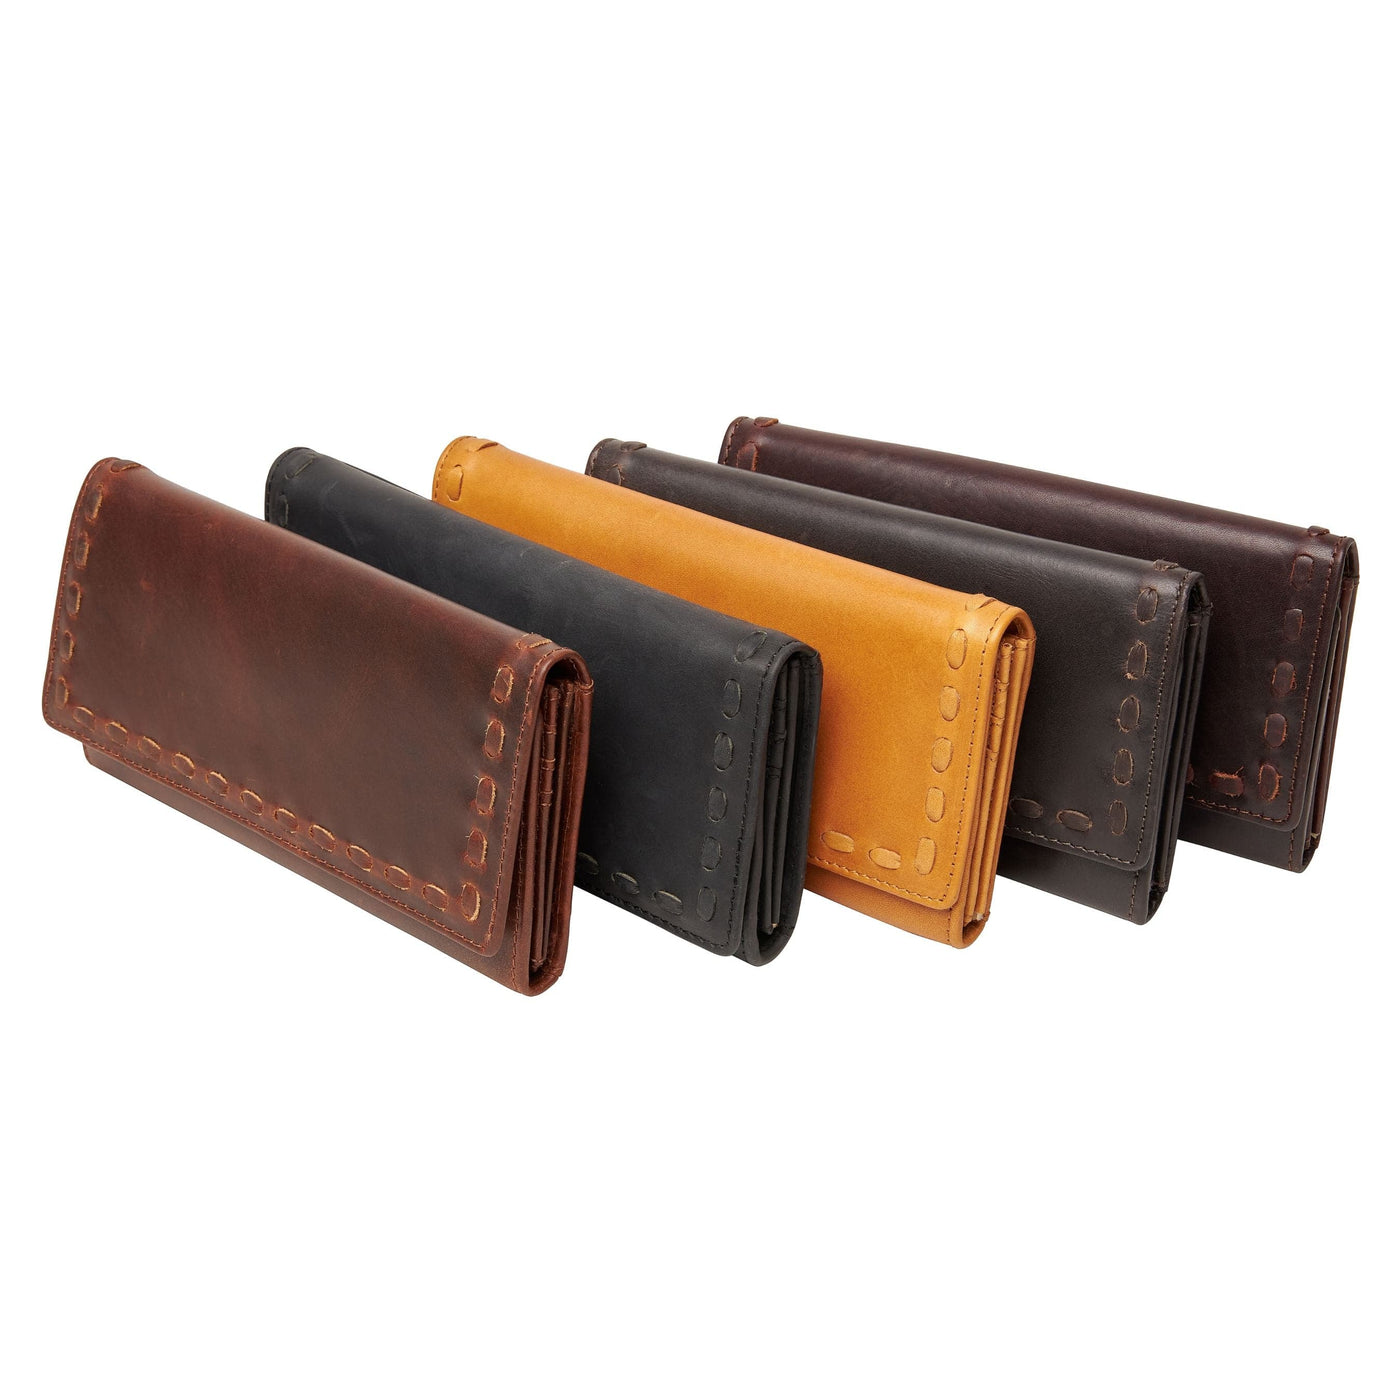 Hope RFID Leather Laced Wallet -   Matching Wallet for Conceal Carry Purse -  brown leather clutch wallet -  leather clutch wallet purse bag -  classic leather clutch wallet -  gray leather clutch wallet  small wallets for women -  mini wallet -  ladies wallet purse -  women wallet sale -  best small wallets for women